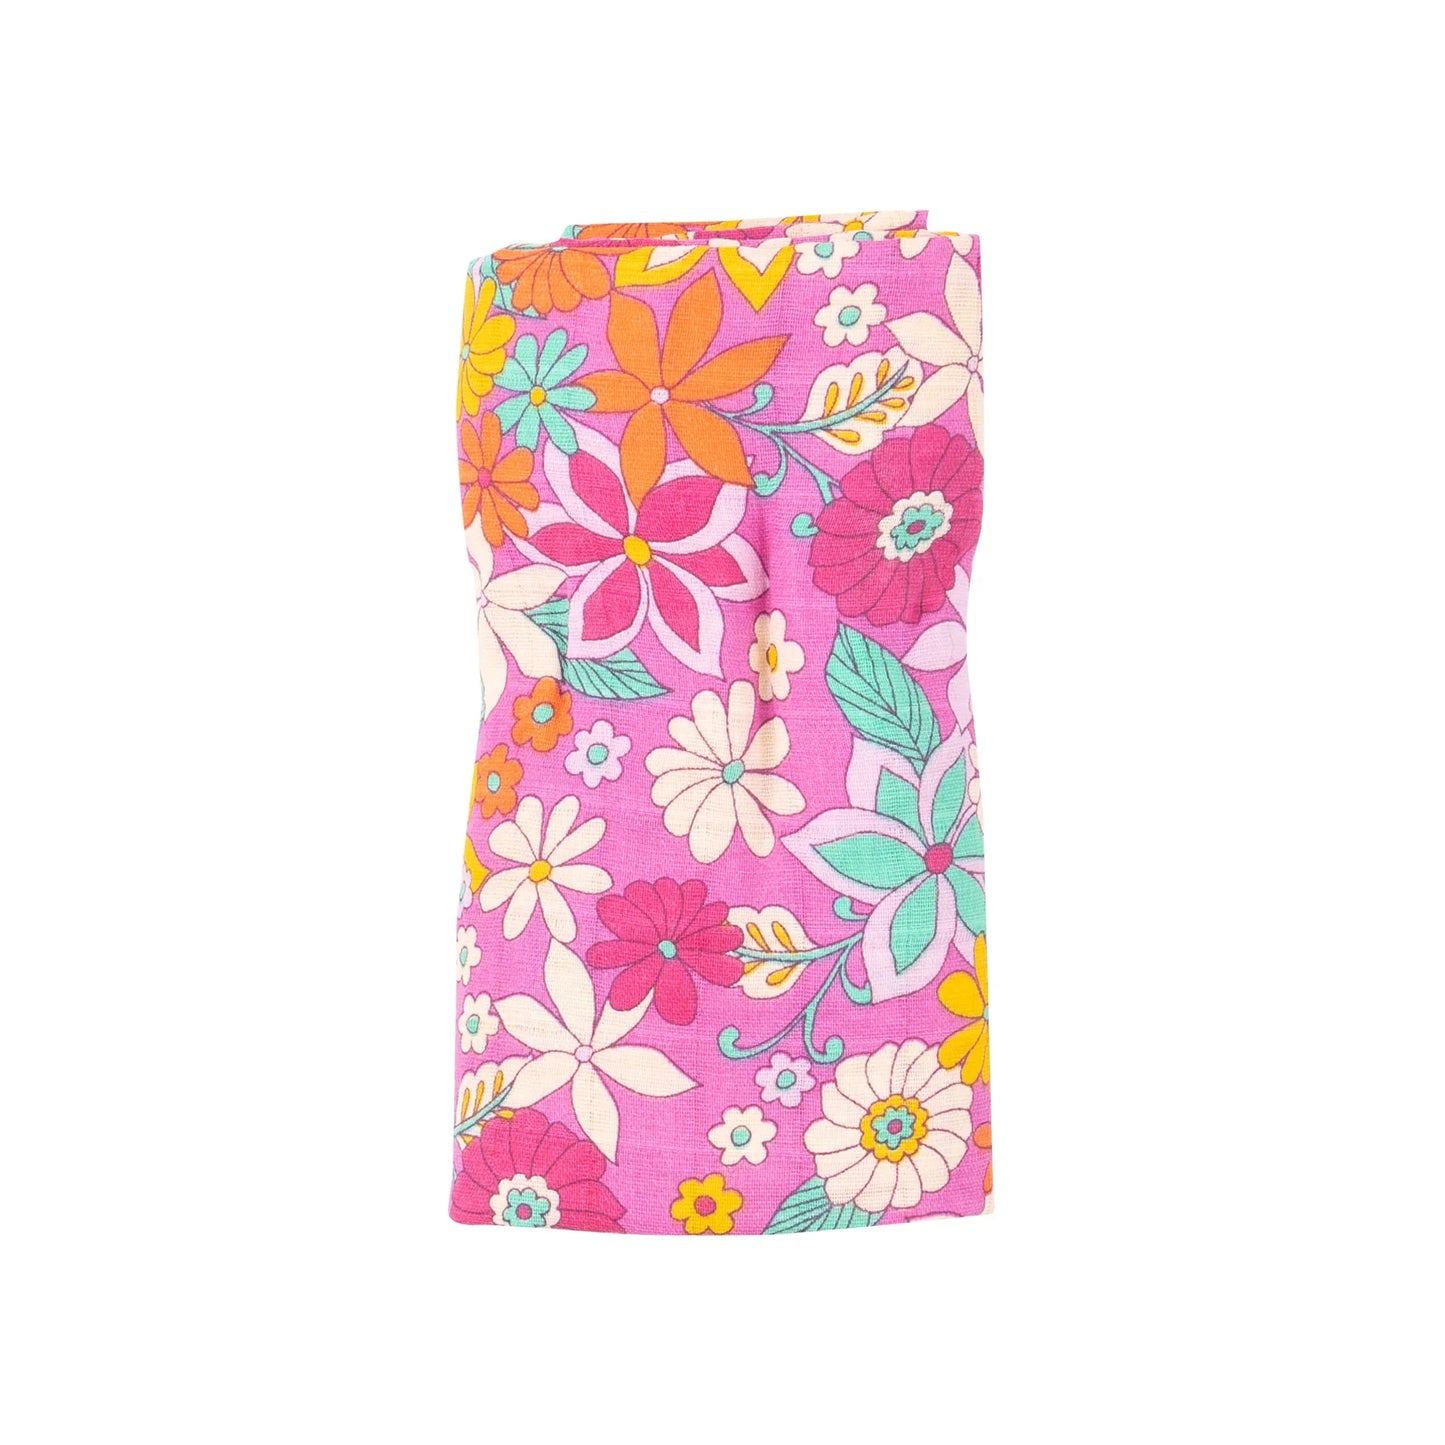 Tropical Retro Floral Swaddle Blanket